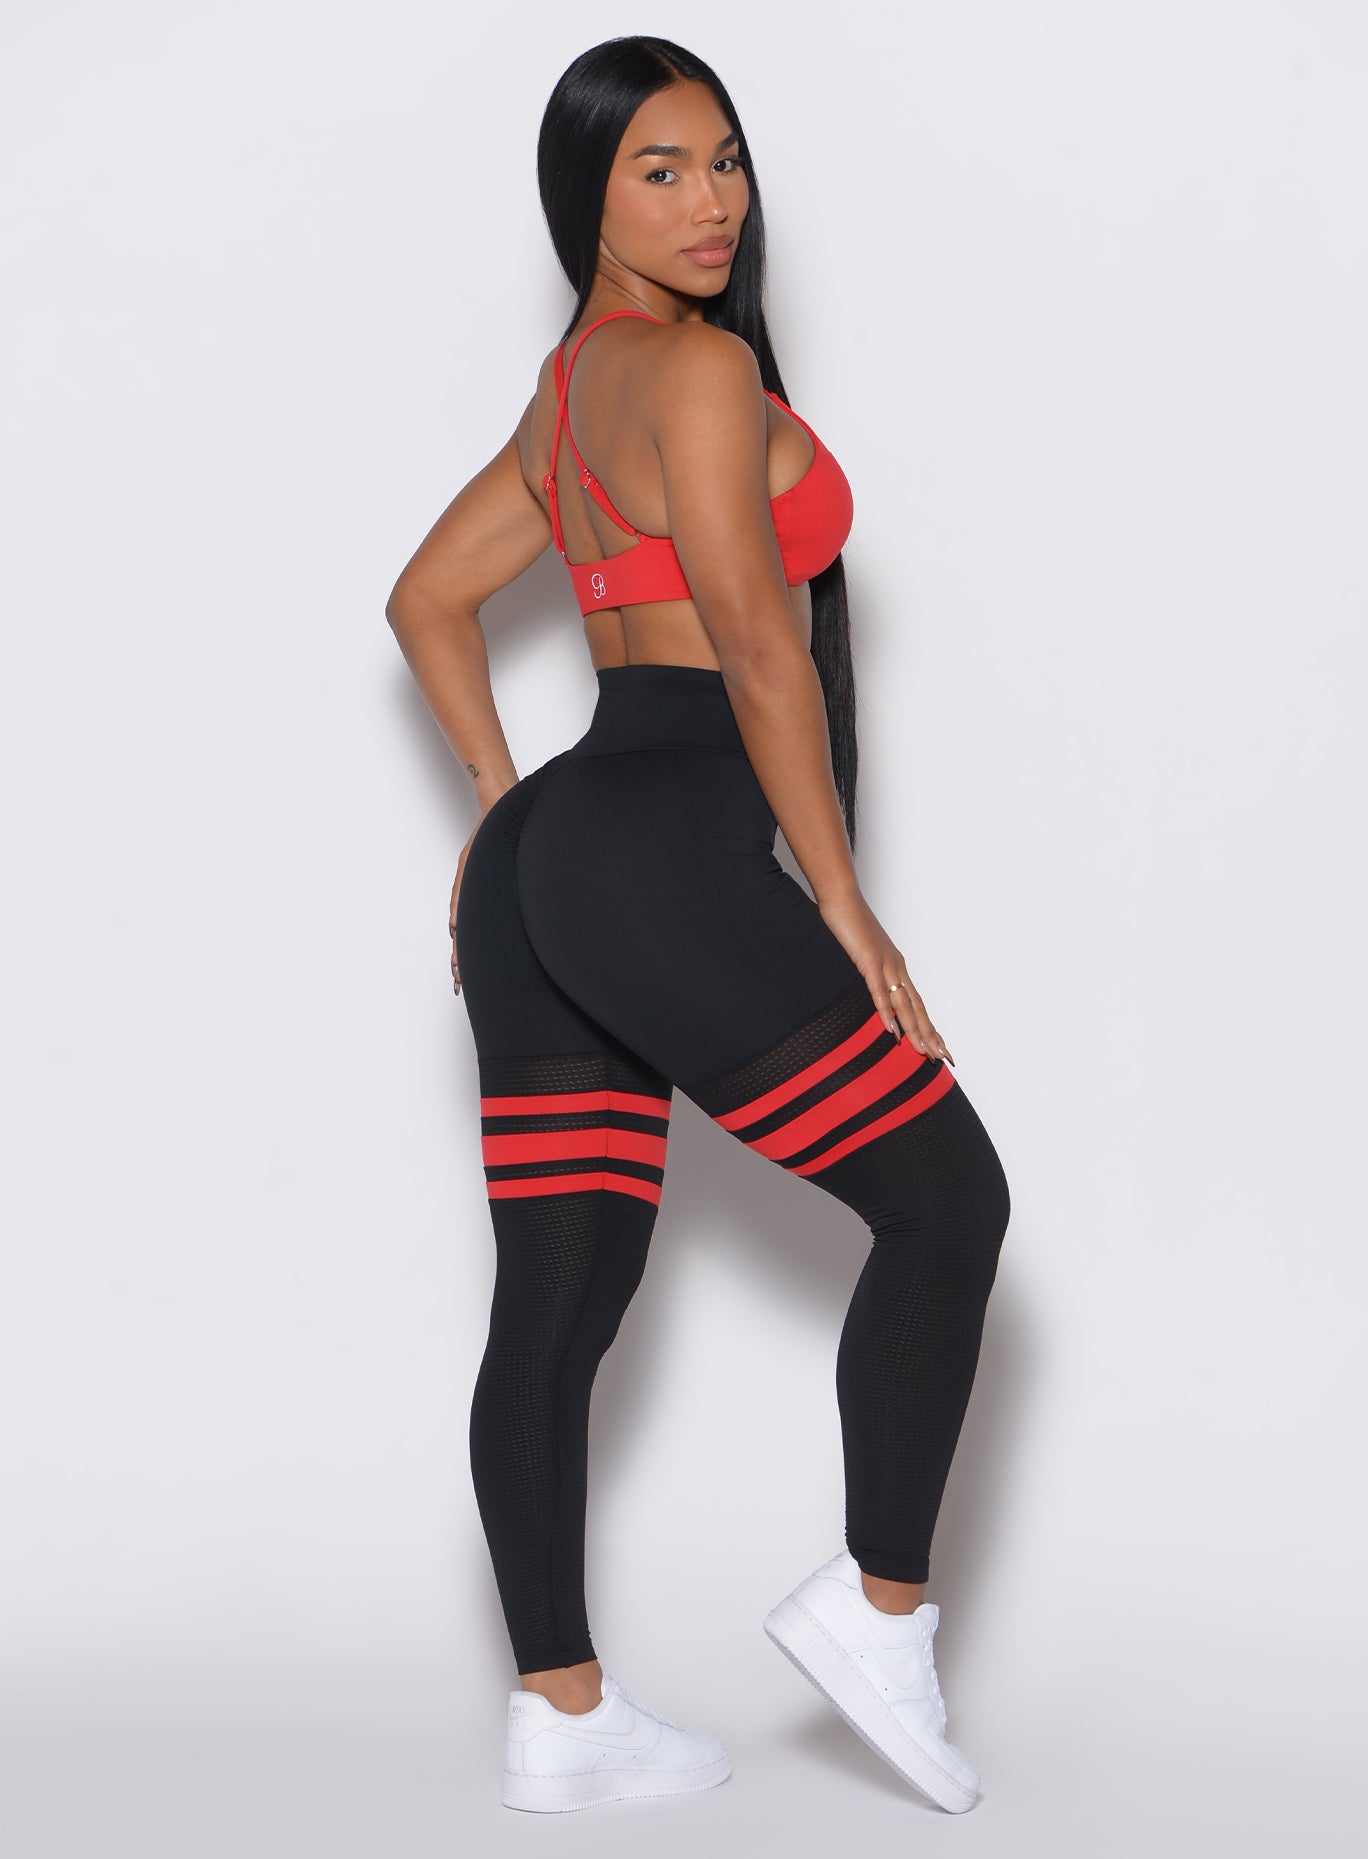 Right side profile view of a model facing to her right wearing our Scrunch Thigh Highs in Black Fire color along with a matching red sports bra 